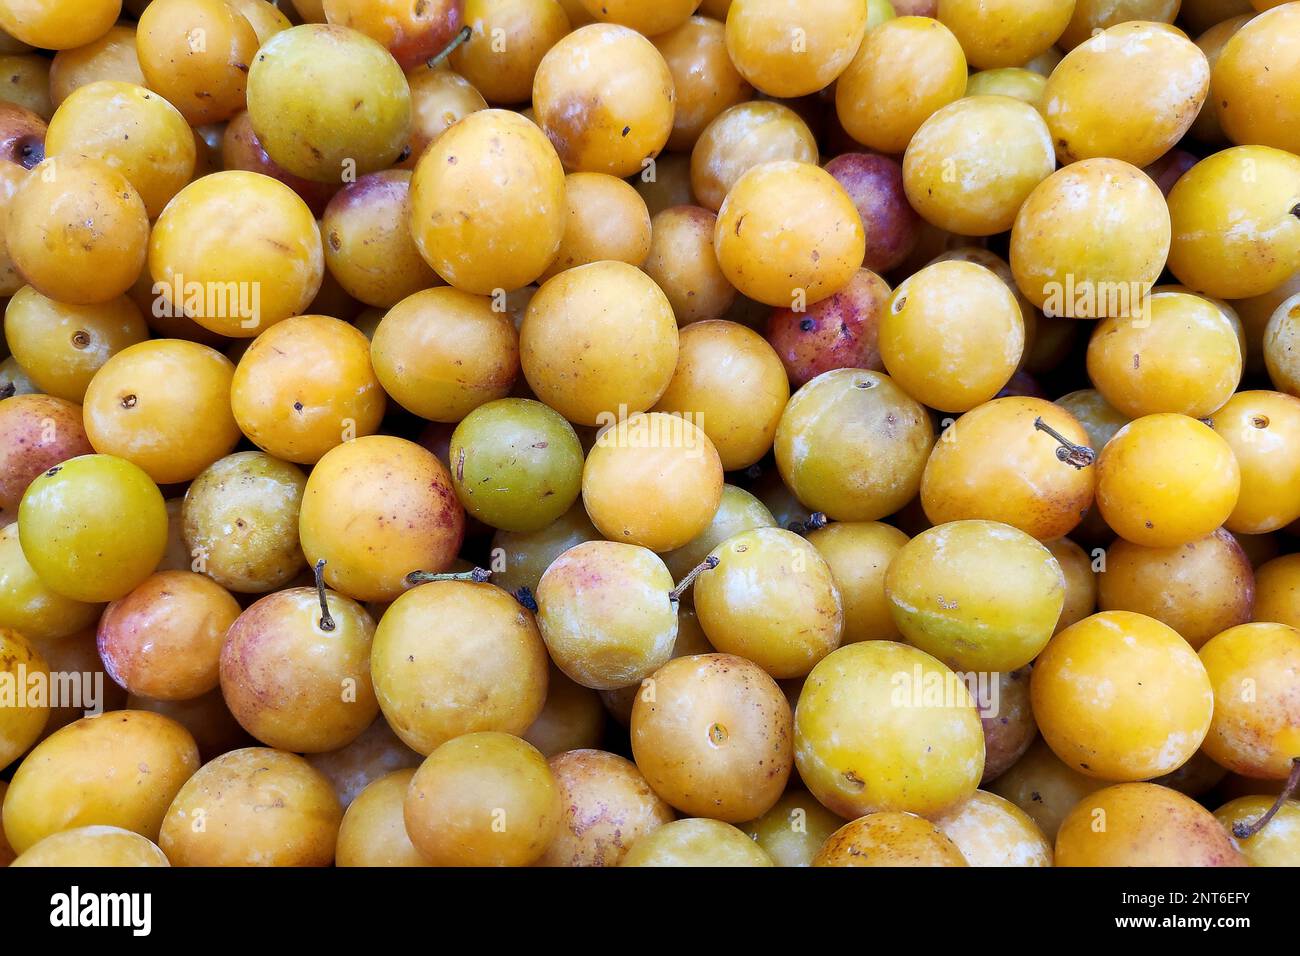 Stack of Mirabelle plums (Prunus domestica subsp. syriaca) on a merchant's stall. Stock Photo